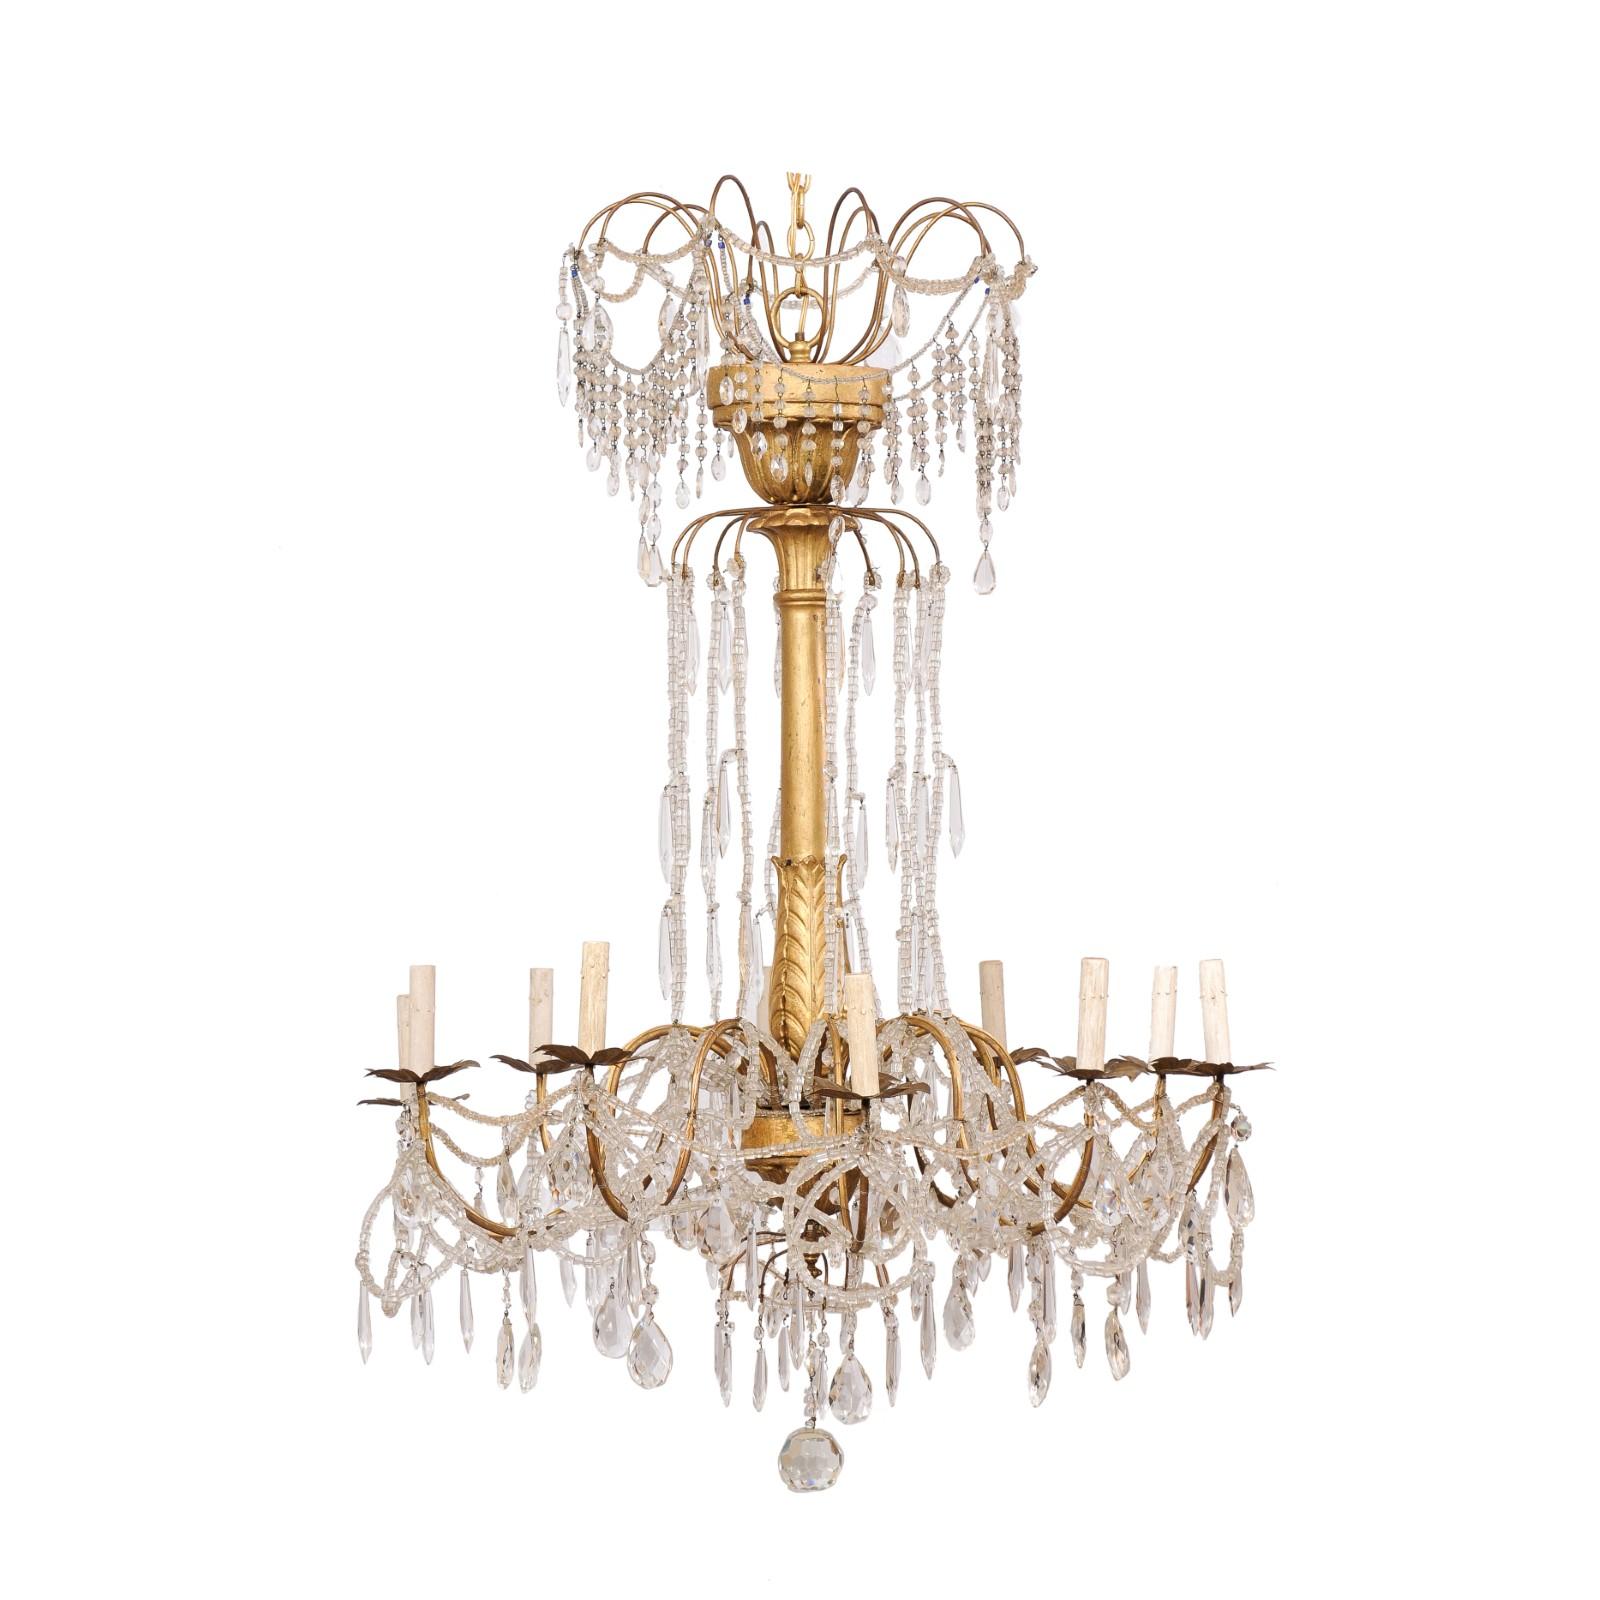 An Italian crystal and gilt wood column chandelier from the mid 20th century. This mid-century hanging light from Italy features a gilt-wood central column, adorn with leaved-wraps carved about it's lower gallery and floral wraps about the top and